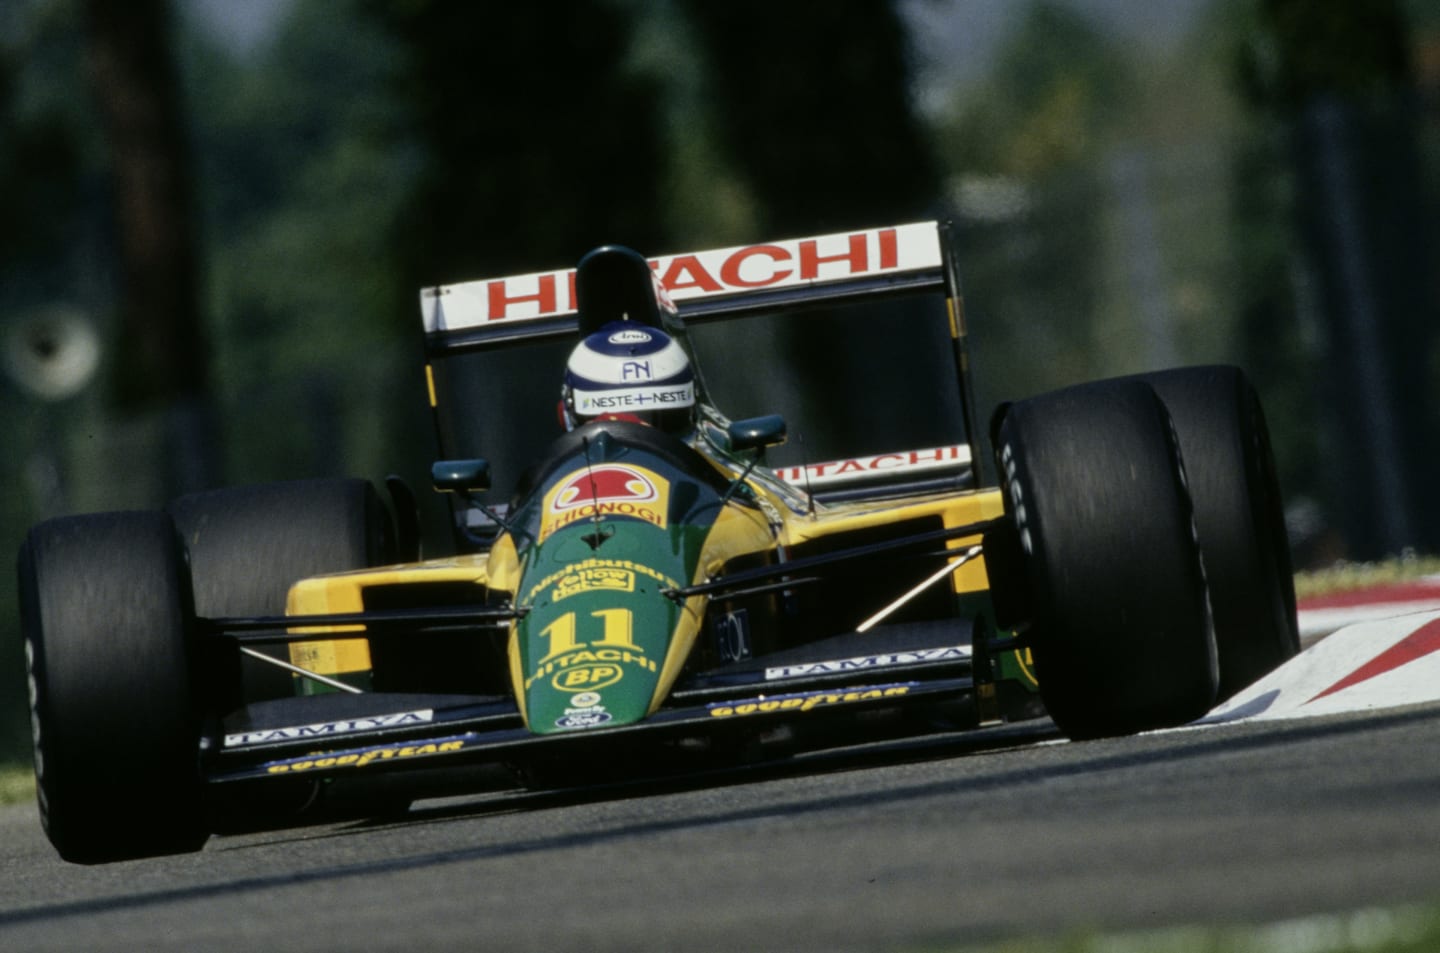 Mika Hakkinen from Finland drives the #11 Team Lotus Lotus 107 Ford V8 during practice for the